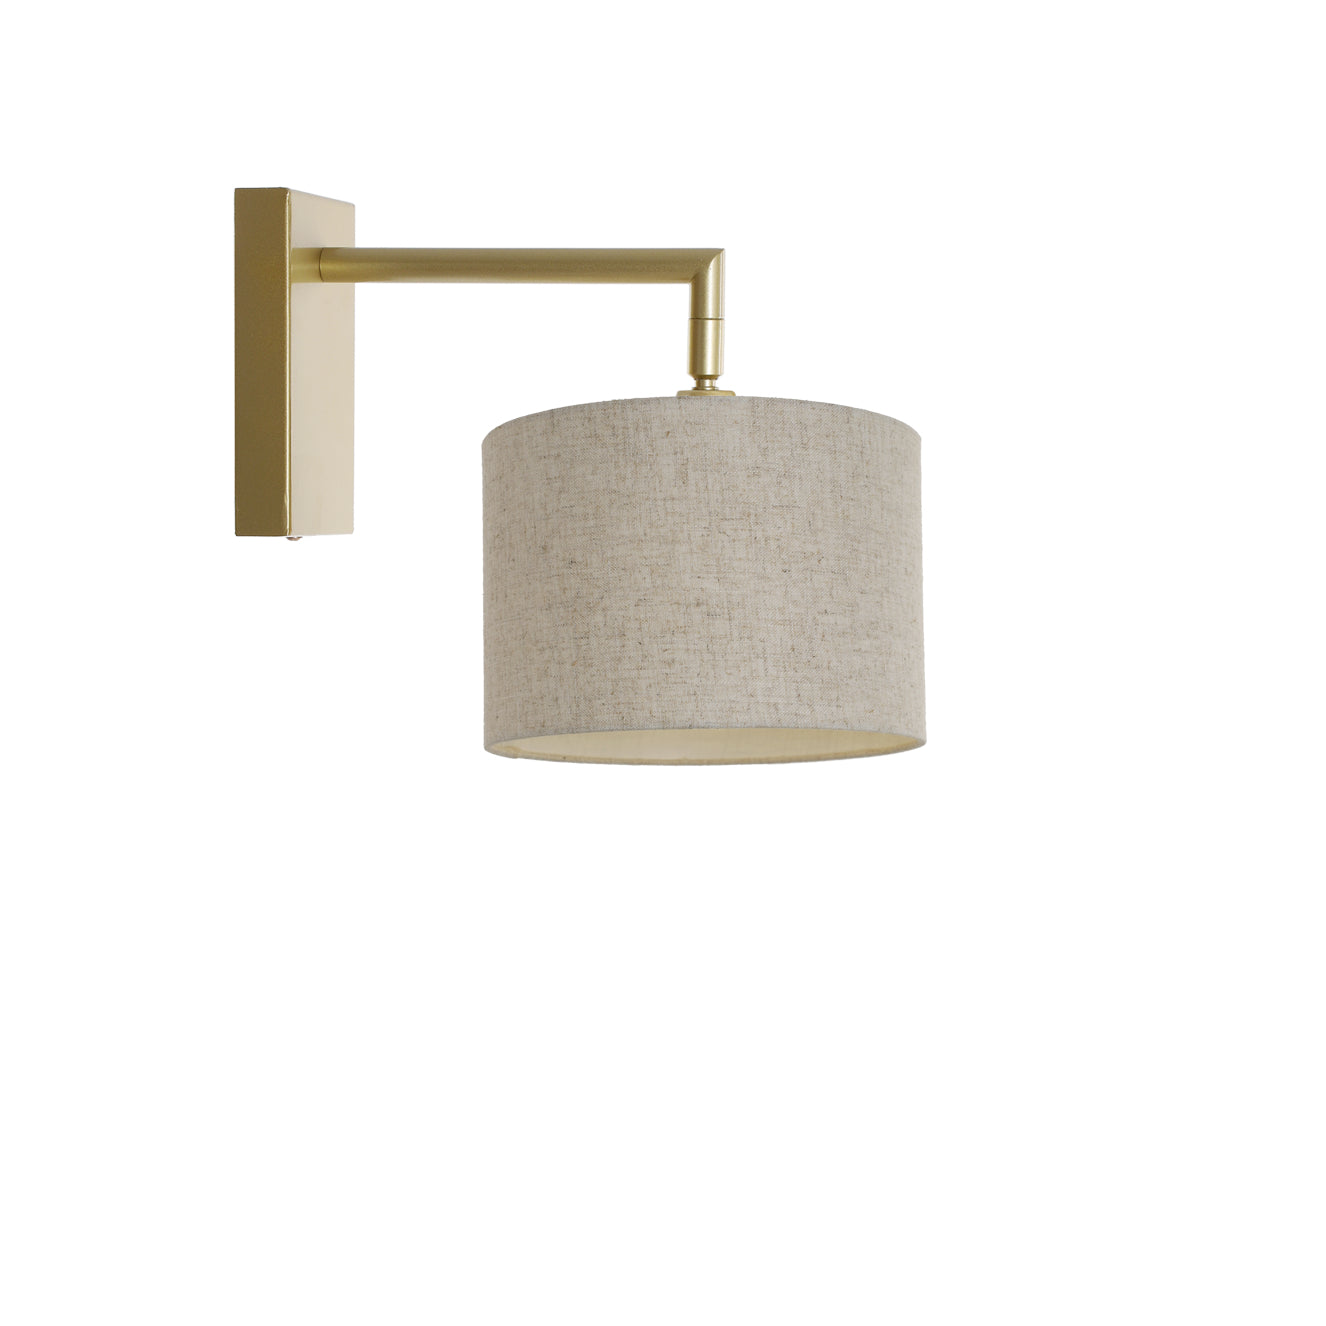 Murano Gold Wall Light with Woven Hand Made Fabric Shade